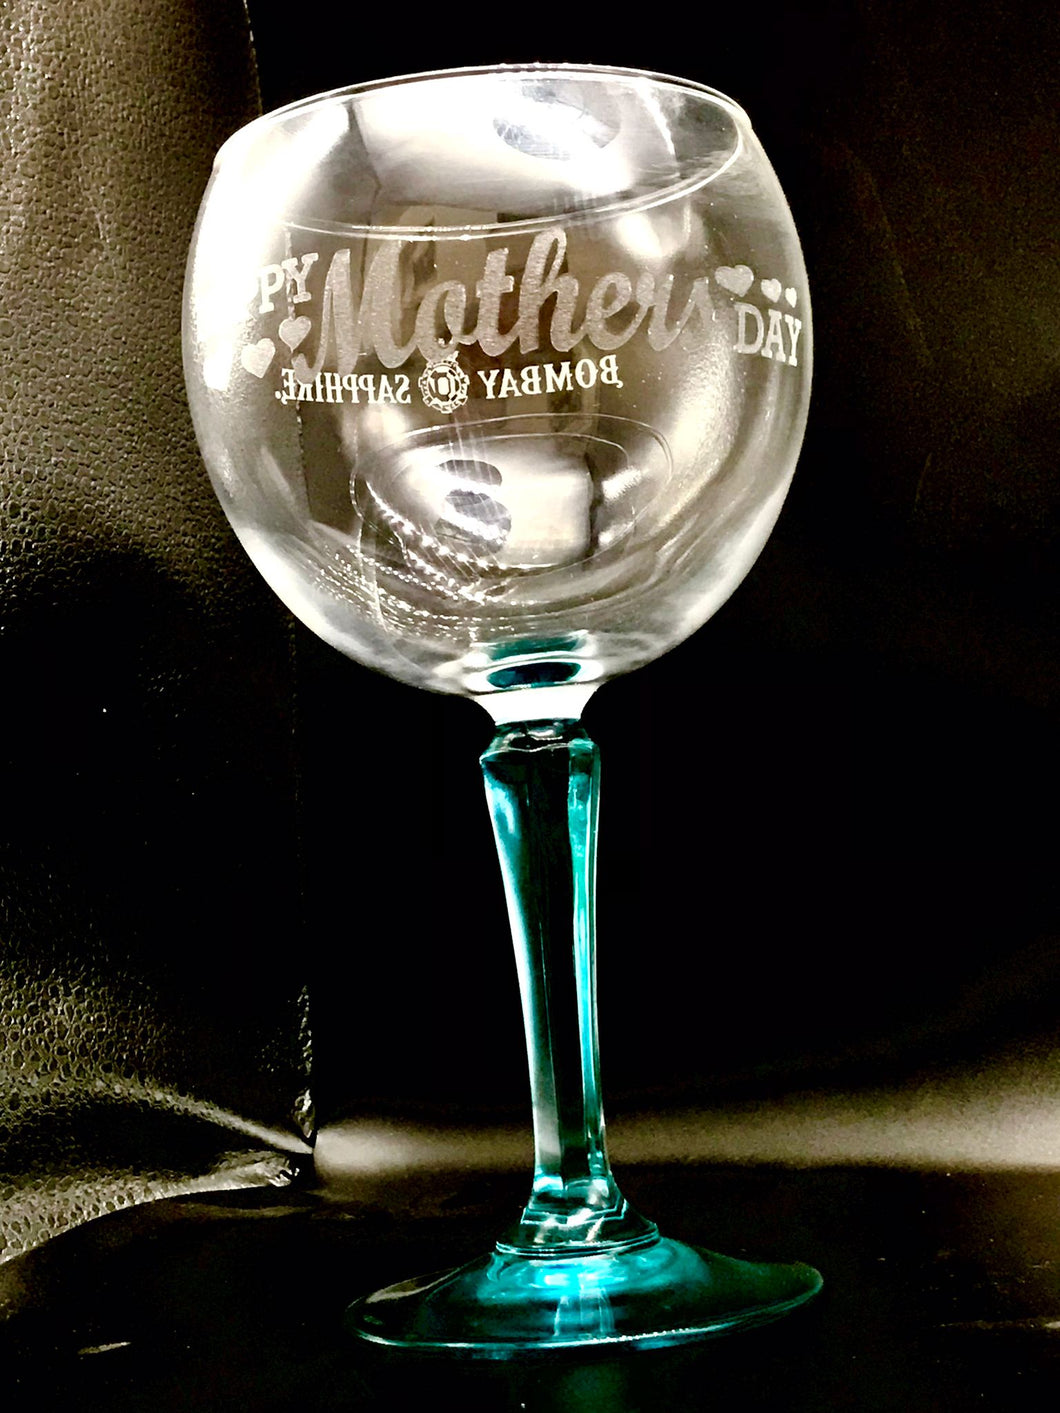 Bombay sapphire engraved “Happy Mother’s Day” glass